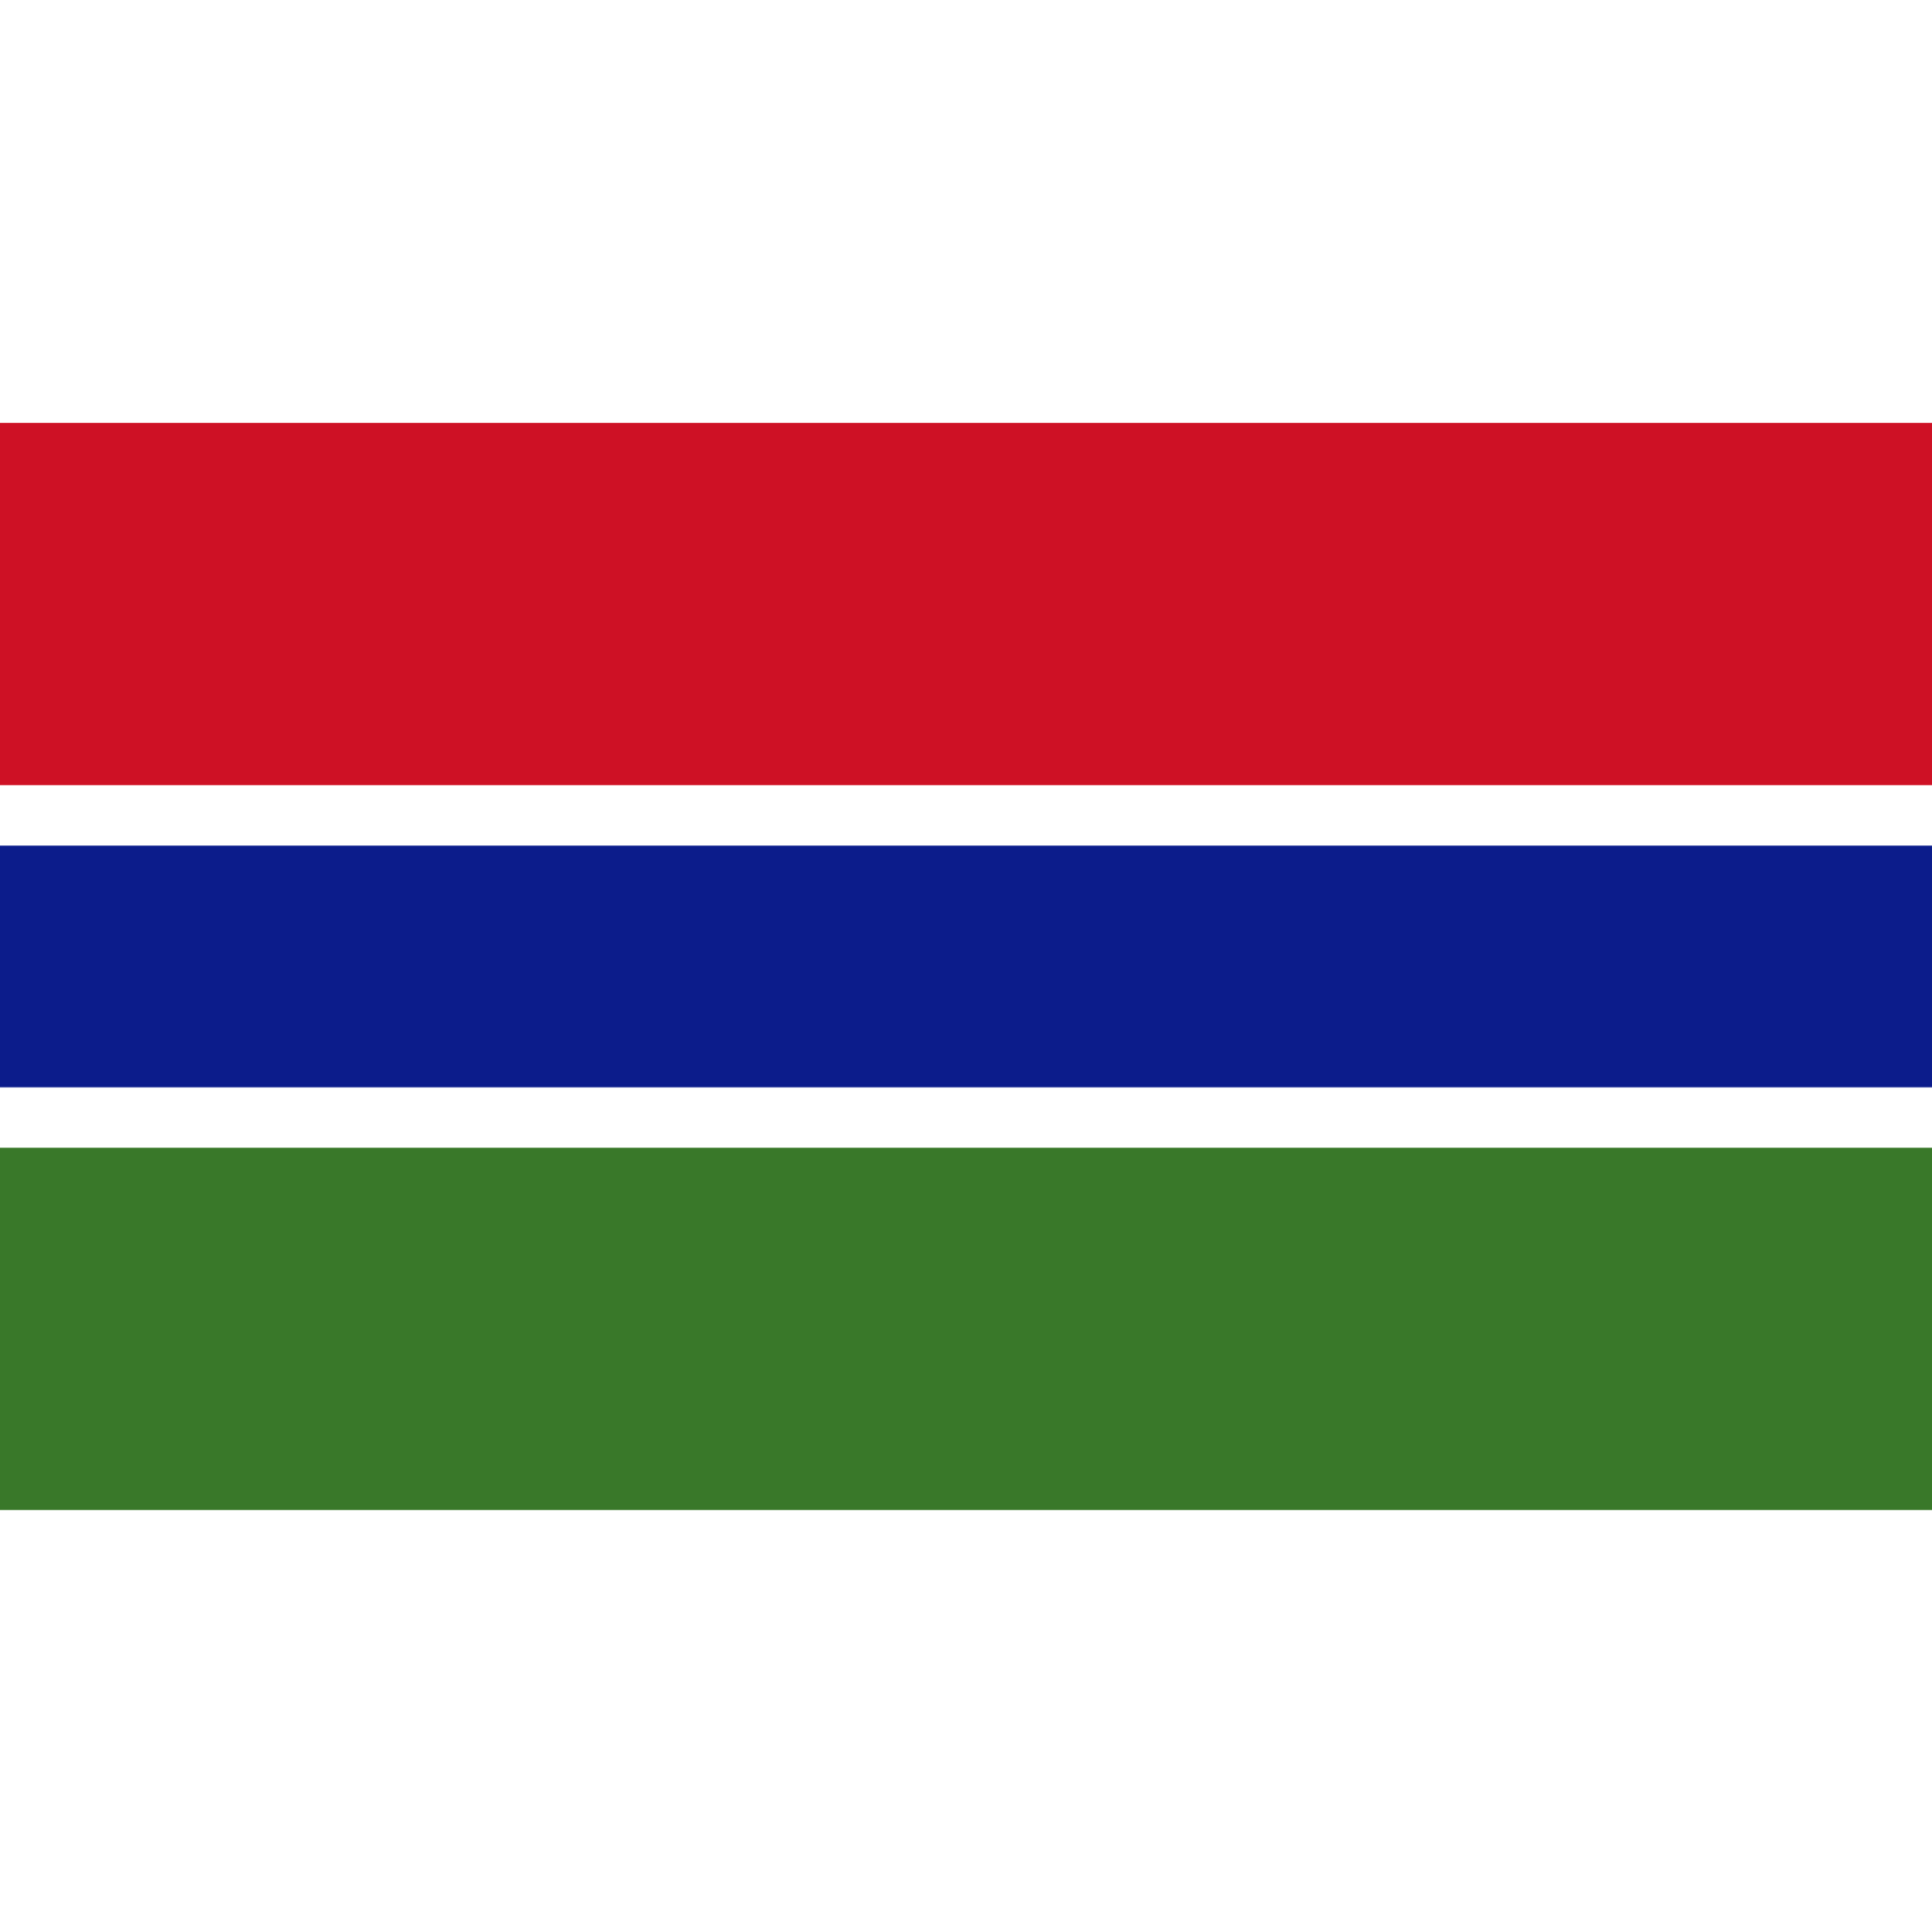 The Gambia flag is made up of 3 horizontal red, blue and green bands, separated by 2 thin white lines.